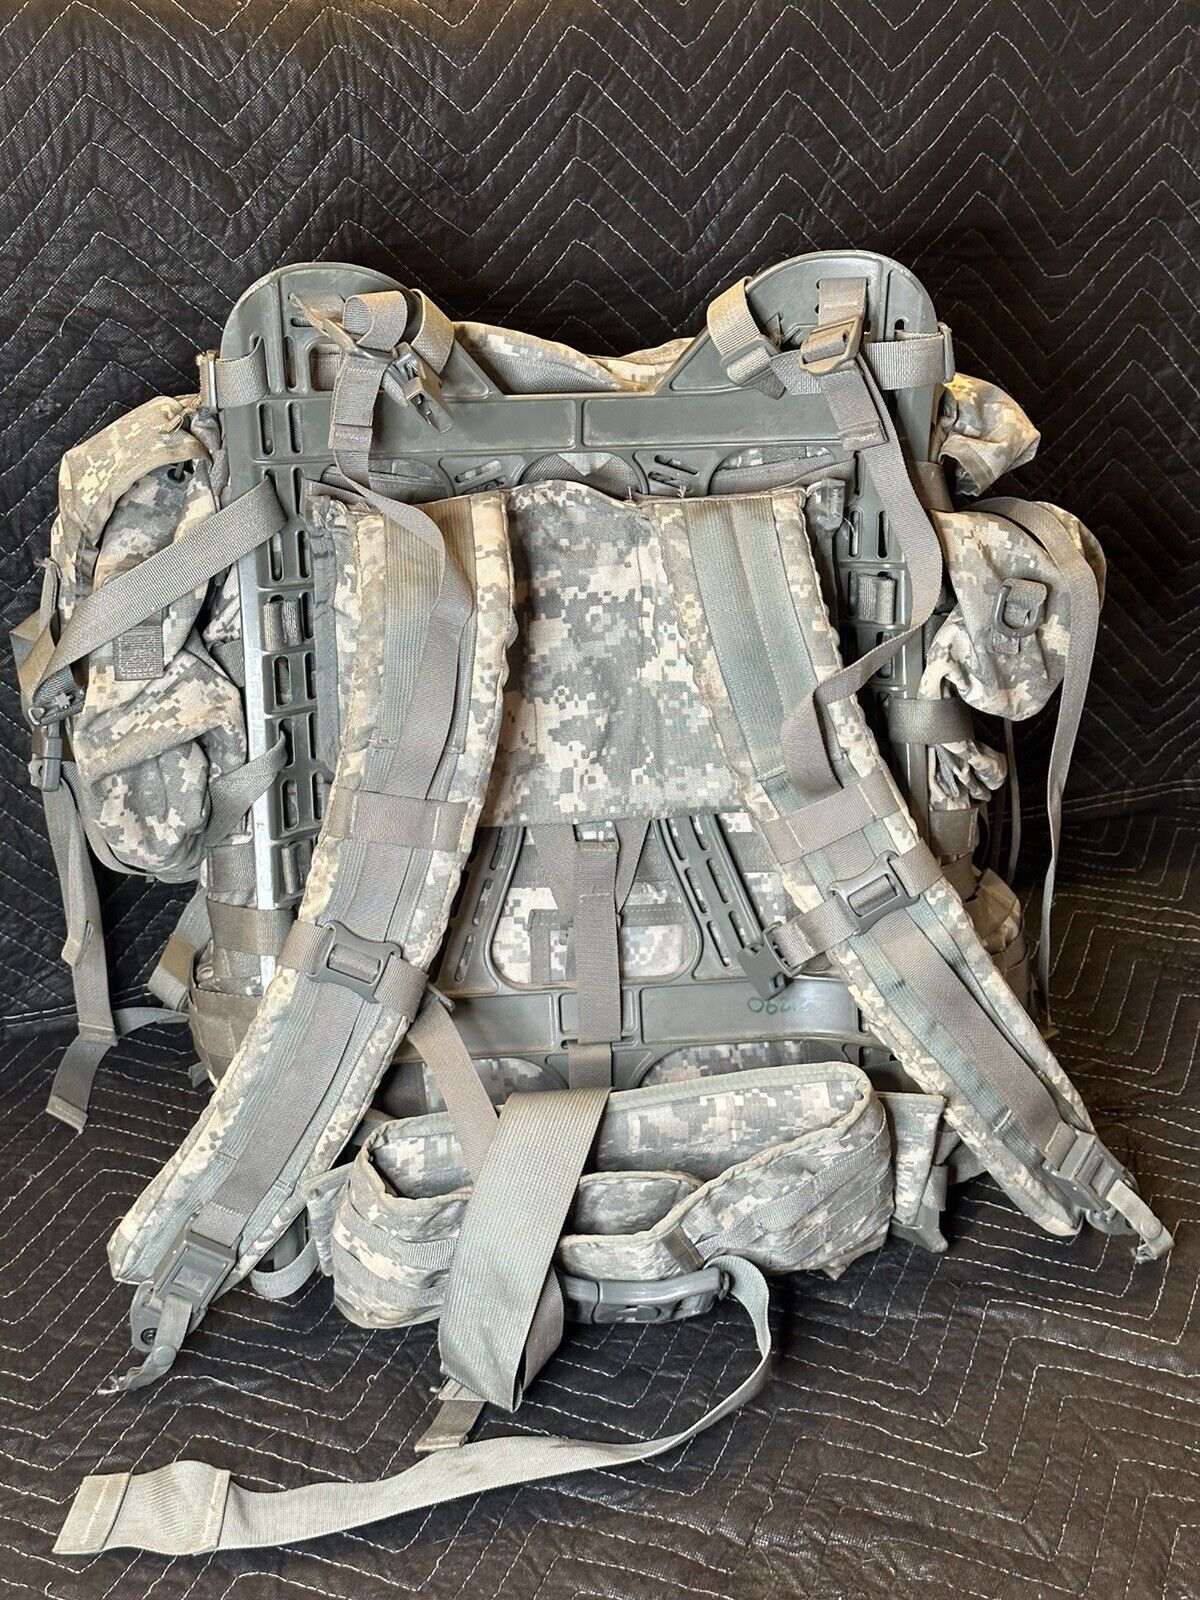 MOLLE II Large Rucksack Complete Field Pack Set w/ Straps, Frame, Pouches